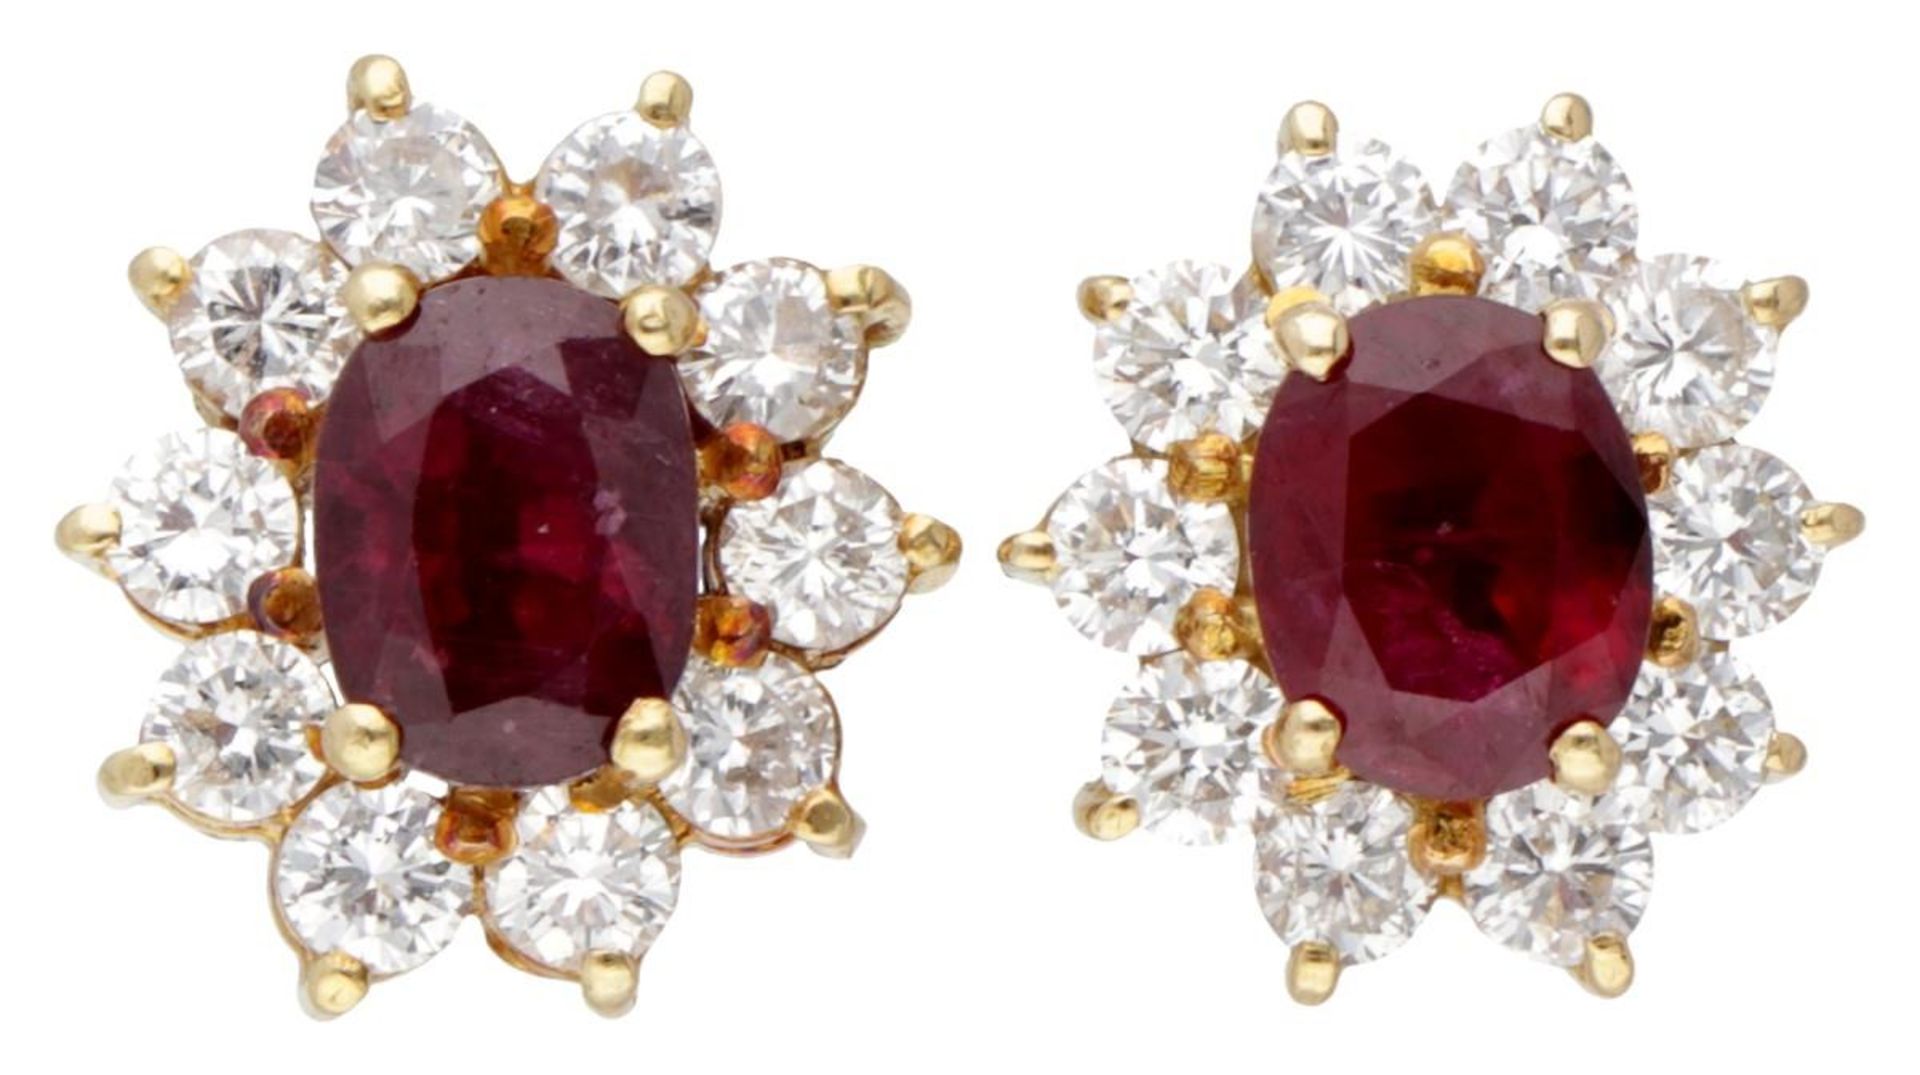 18K. Yellow gold cluster stud earrings set with approx. 0.80 ct. diamond and approx. 0.86 ct. ruby. - Image 2 of 6